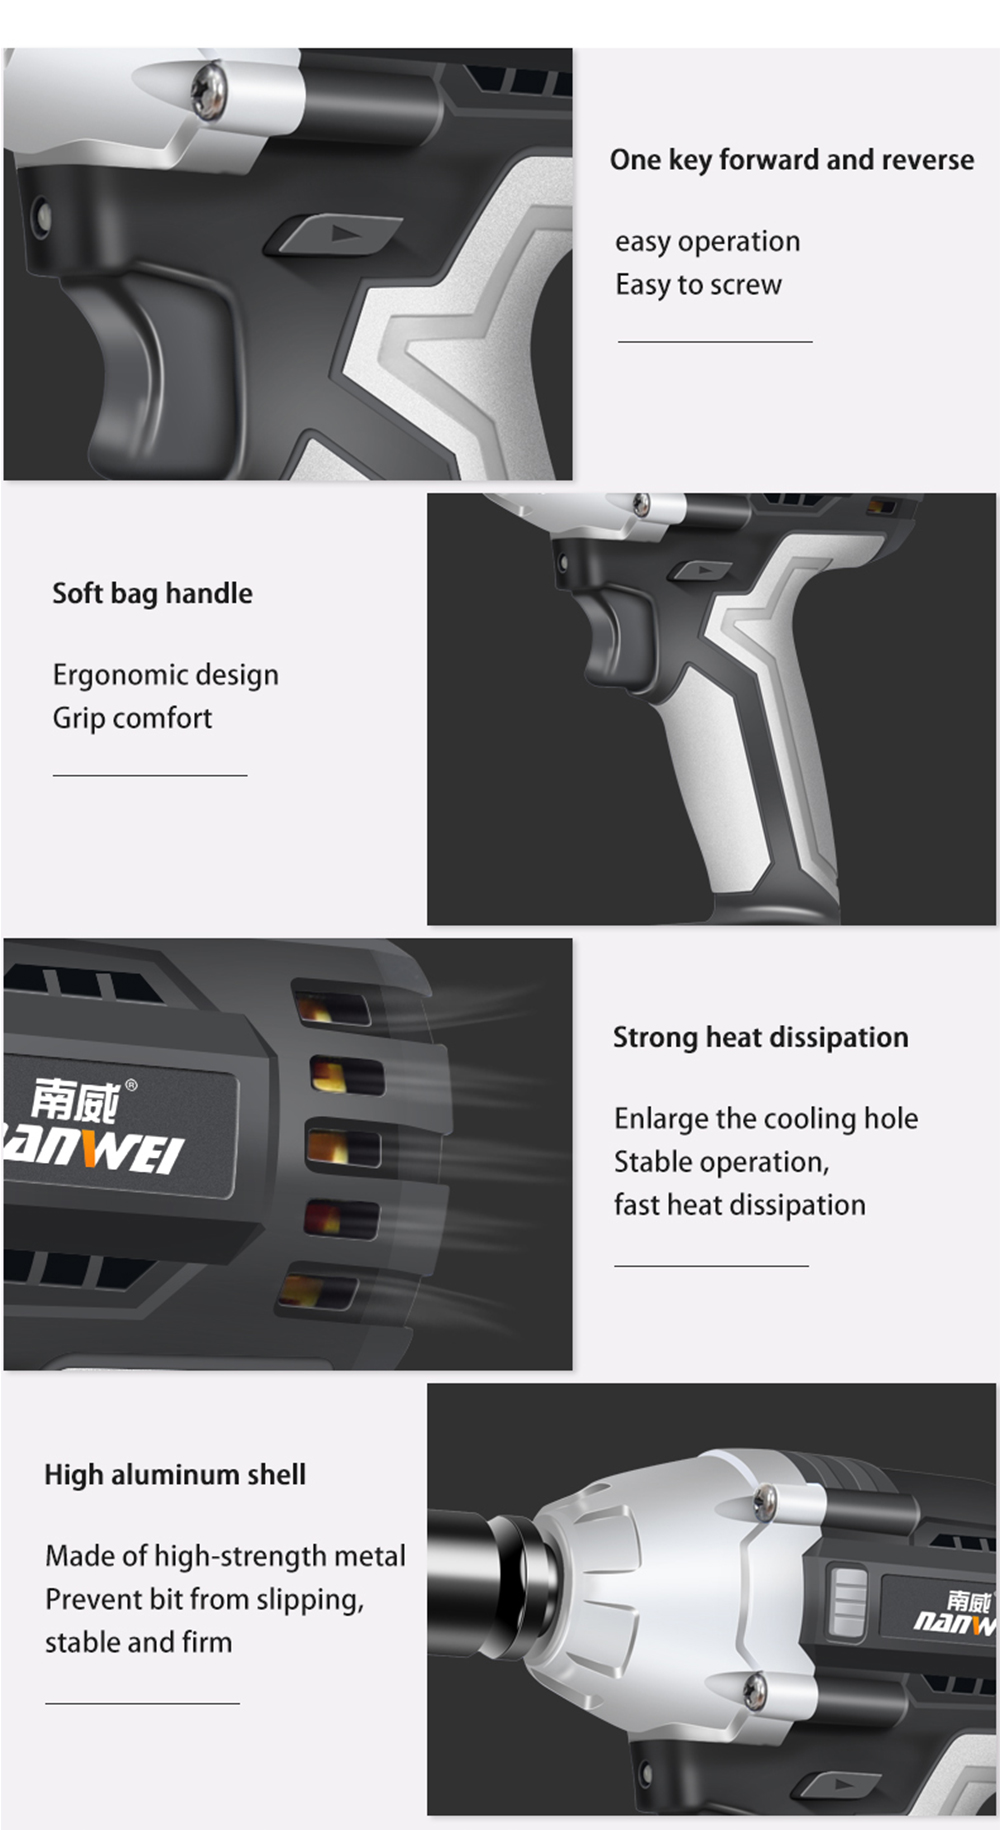 NANWEI-380NM-Brushless-Electric-Impact-Wrench-Adjustable-Speed-Regulation-with-4060Ah-Lithium-Batter-1656619-10